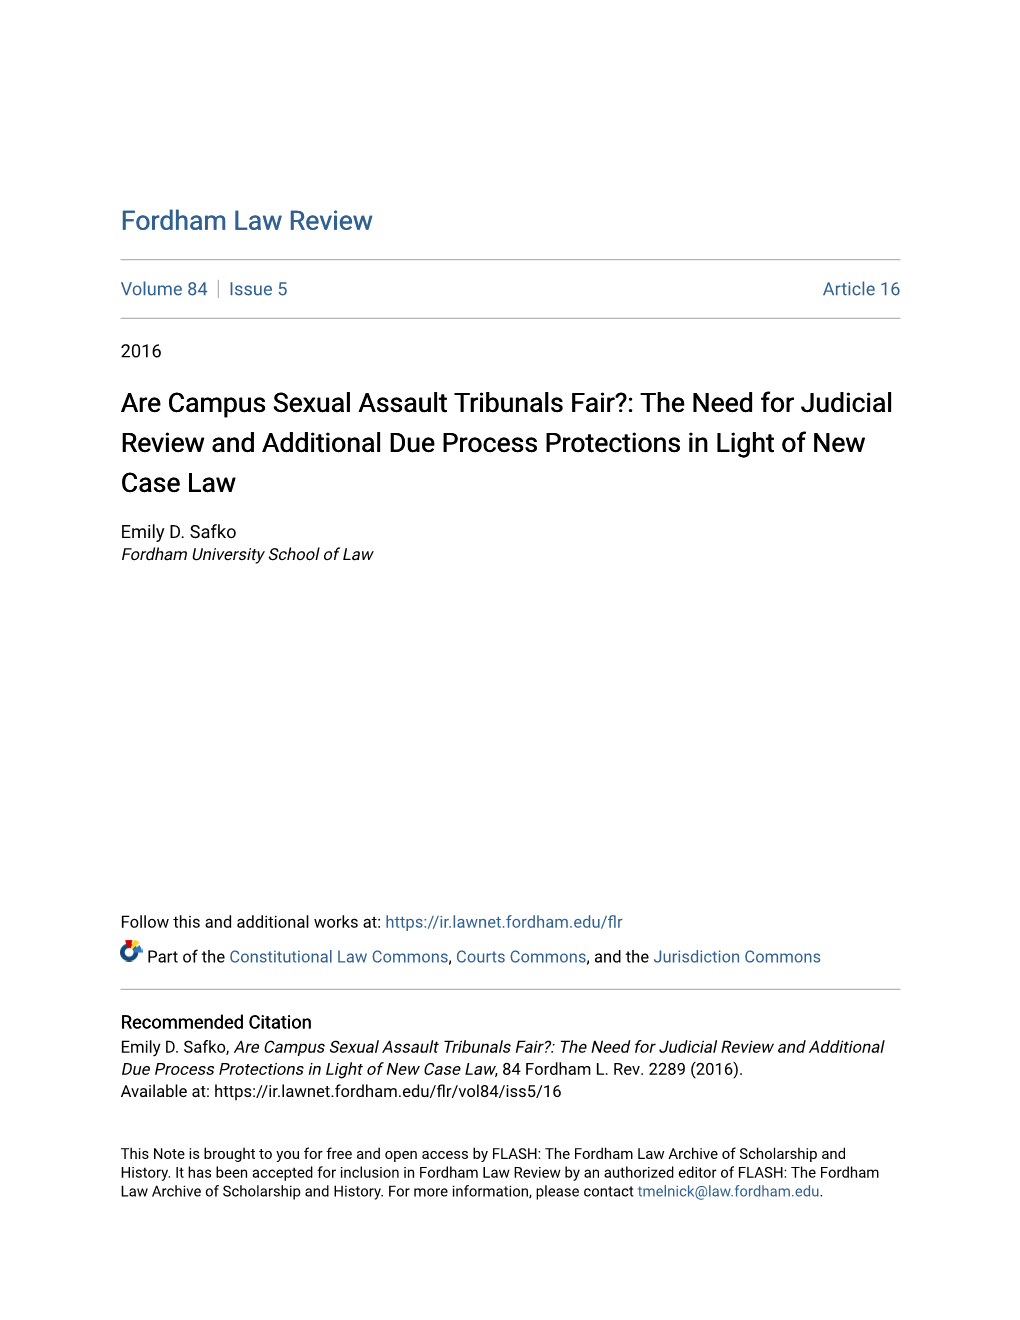 Are Campus Sexual Assault Tribunals Fair?: the Need for Judicial Review and Additional Due Process Protections in Light of New Case Law